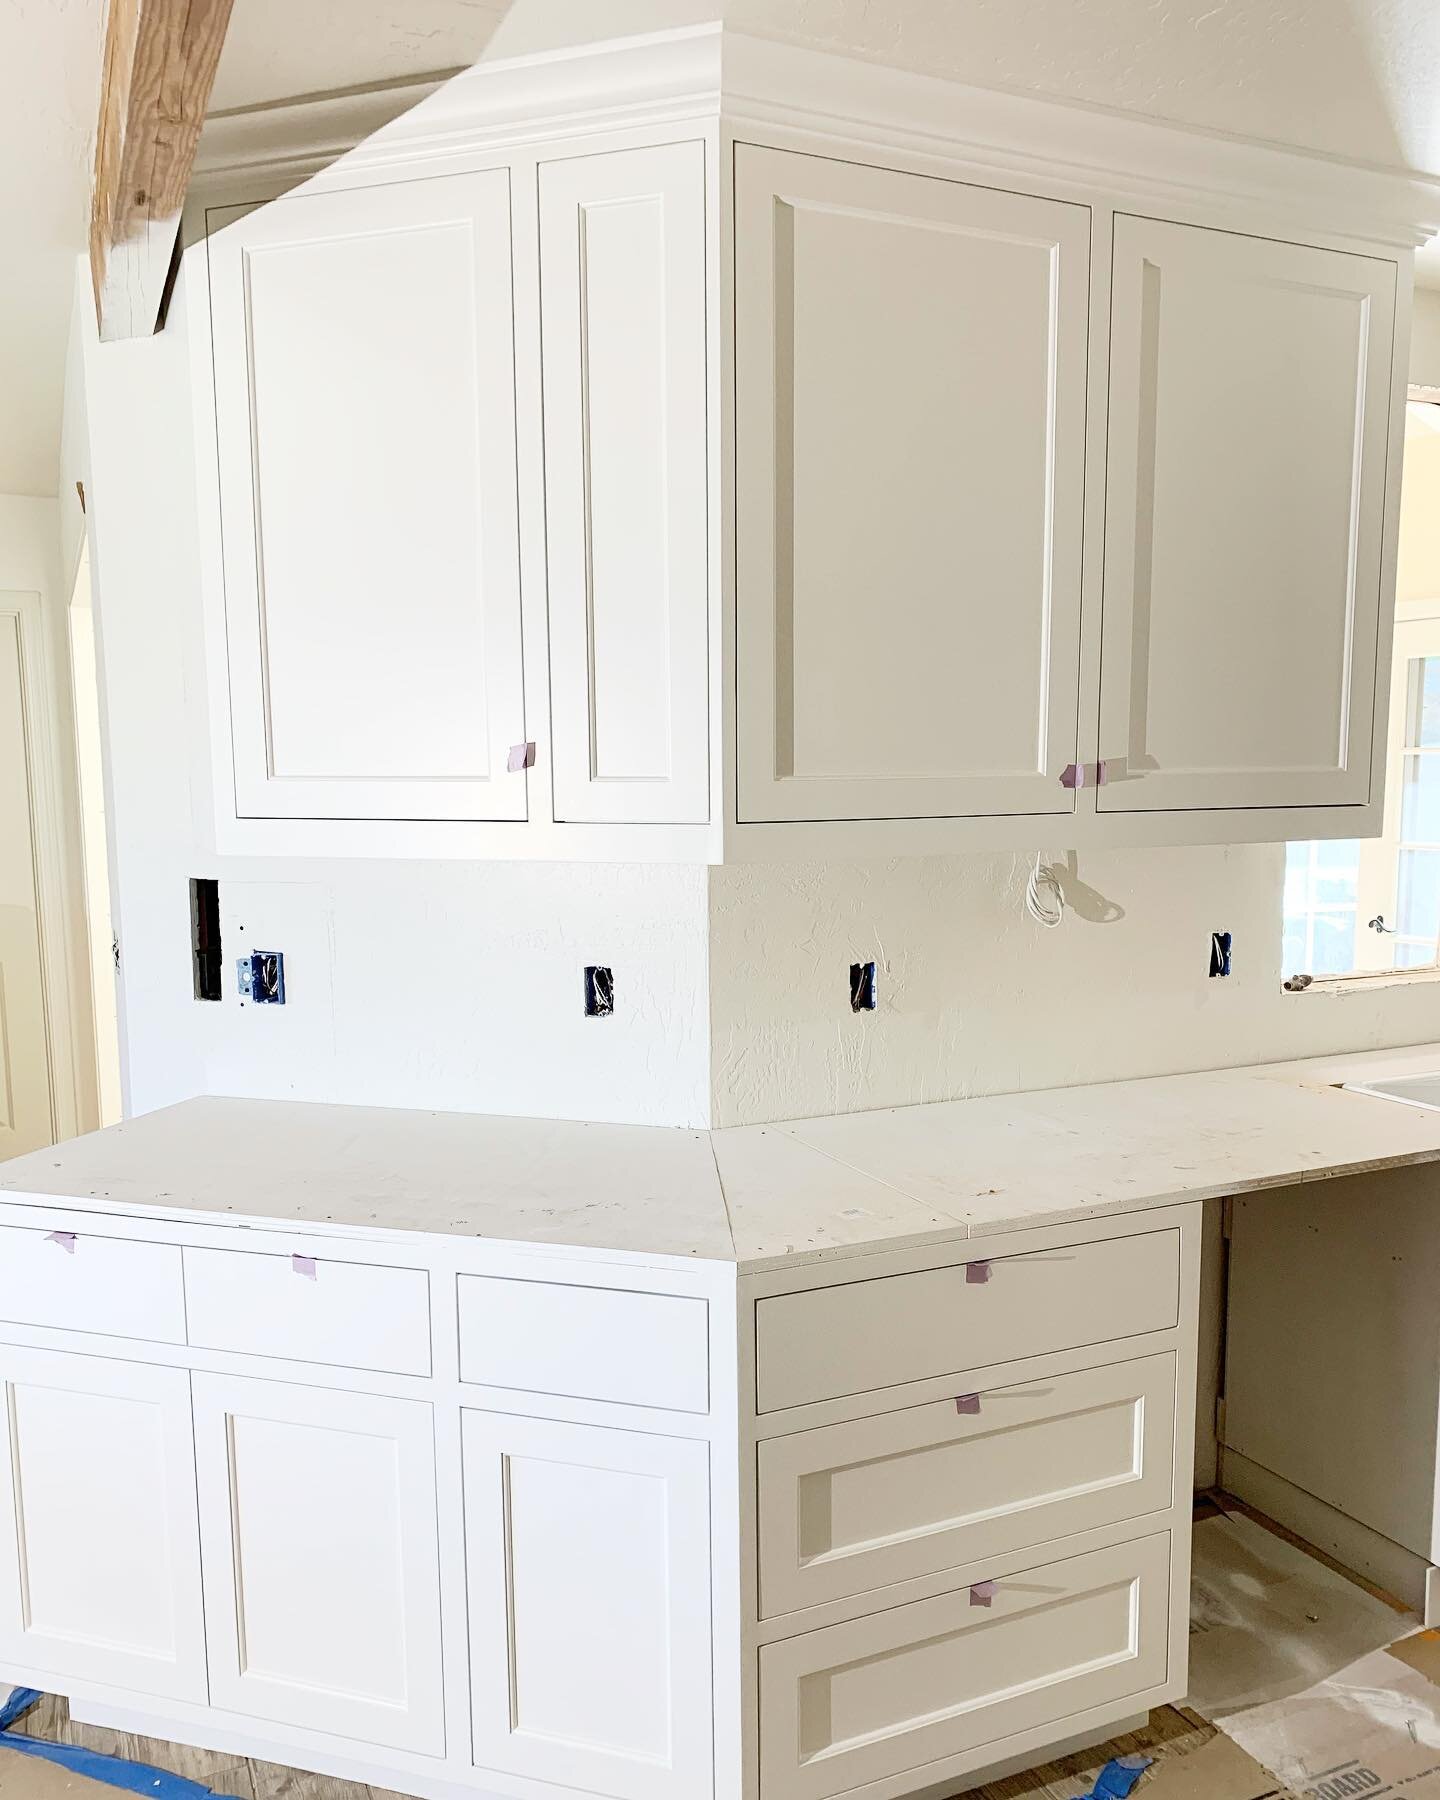 Close to being finished on this kitchen. Paint grade with stained accents